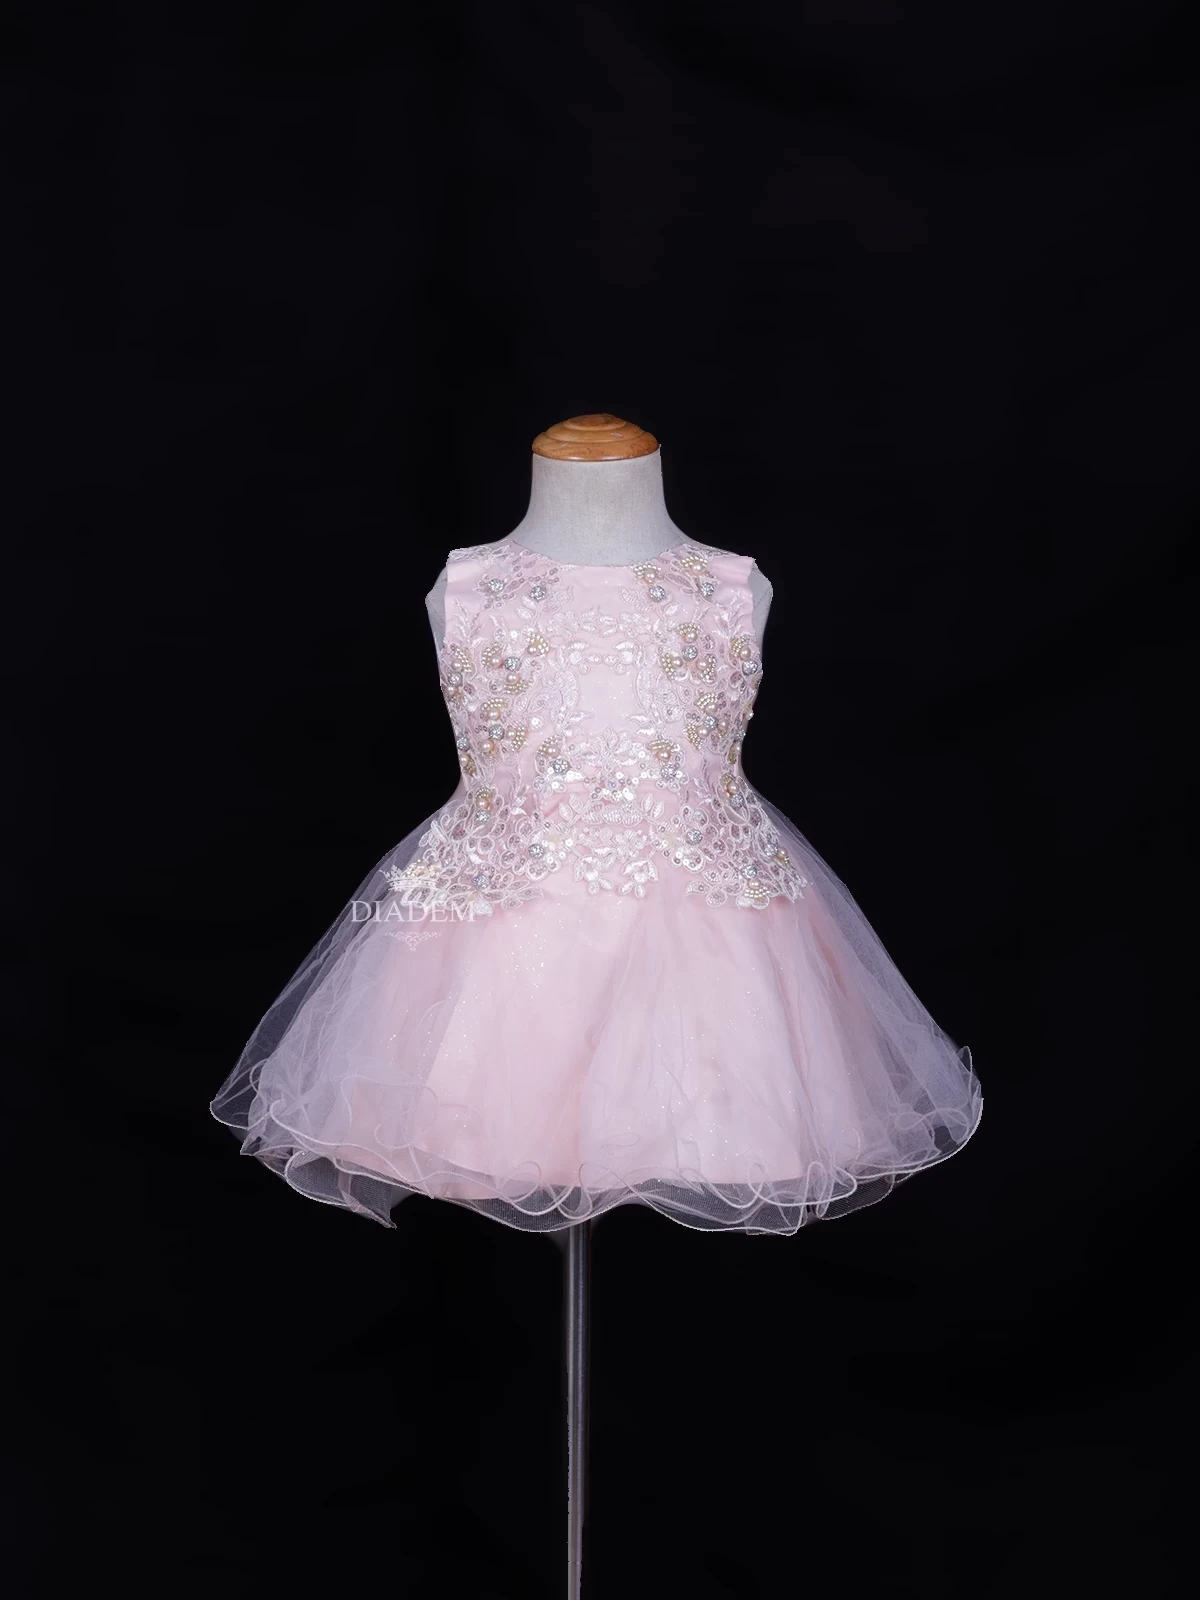 Light Peach Net Frock Embellished With Floral Laces And Pearl Beads